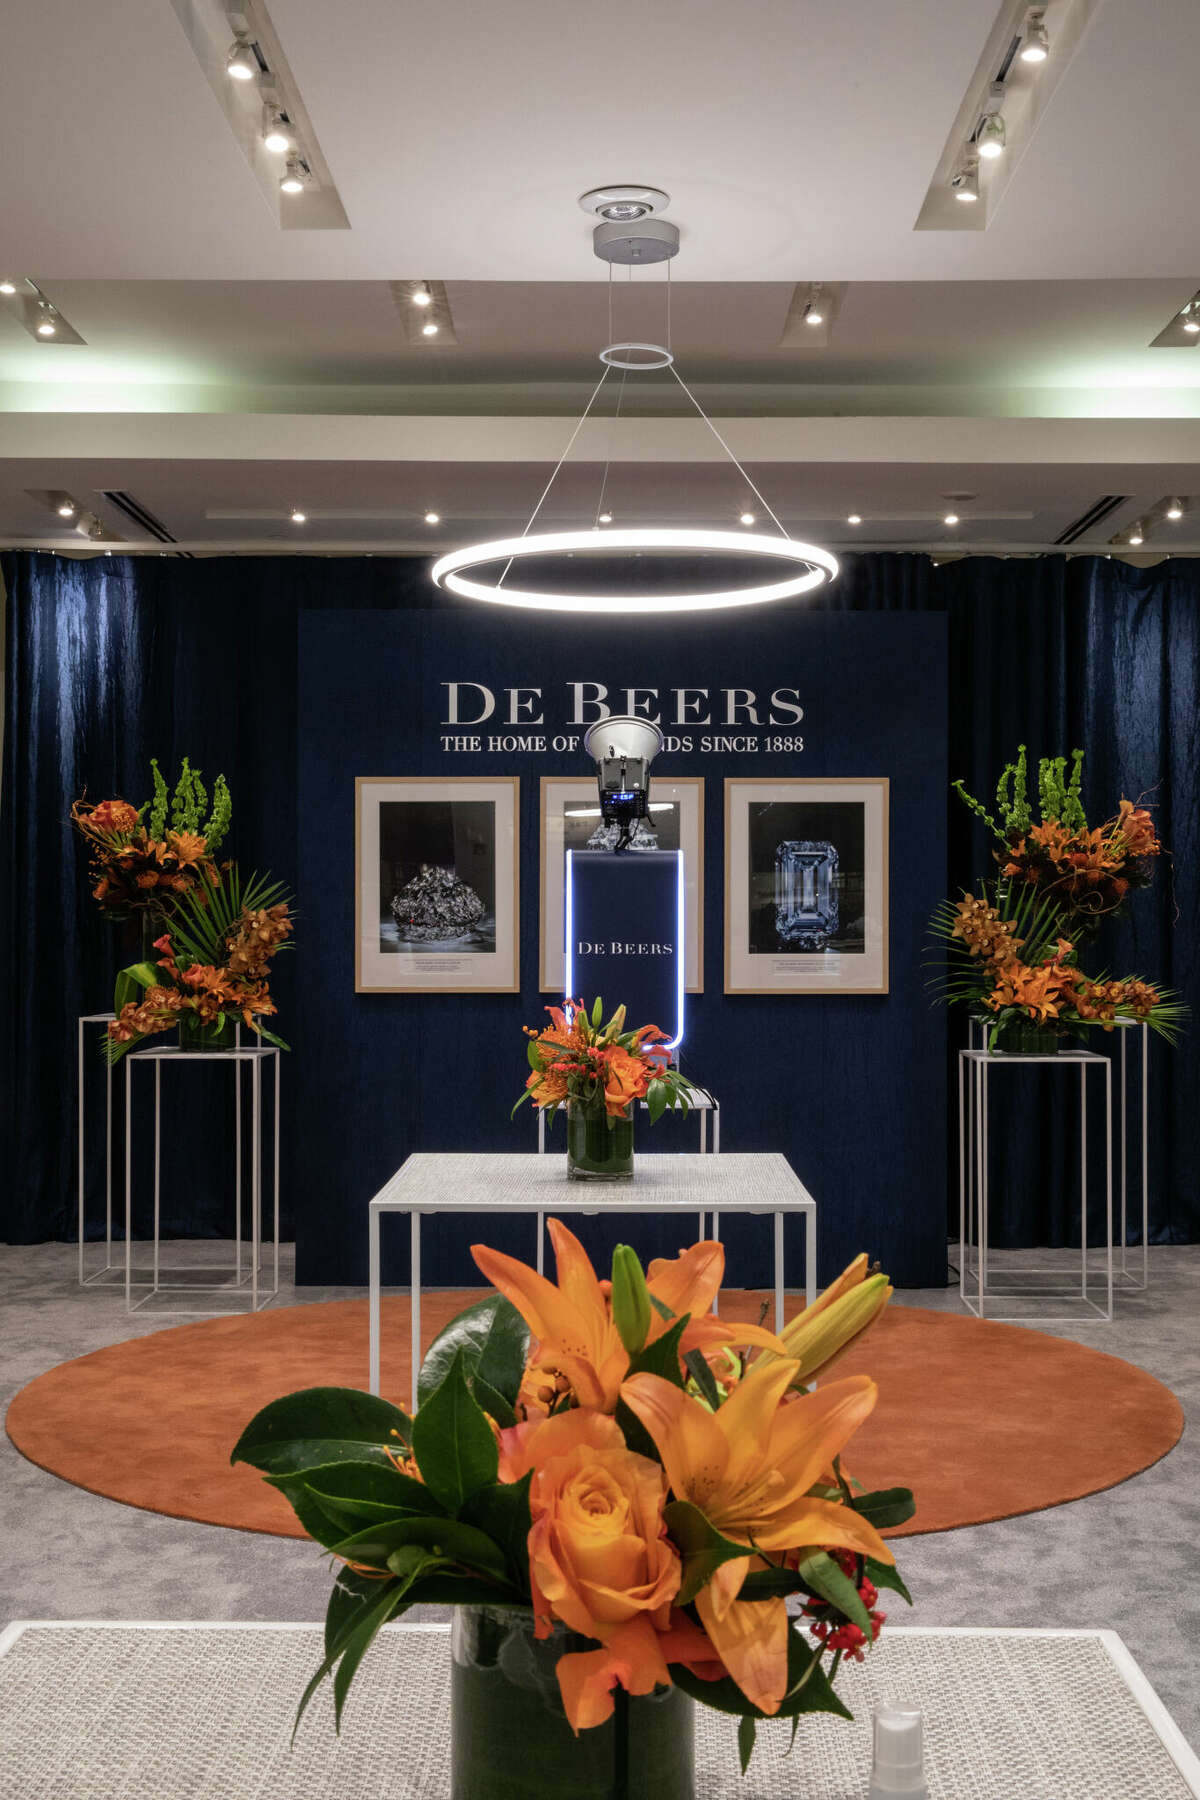 Jewelry brand, De Beers Jewellers, located on 243 Greenwich Ave. at Betteridge Jewelers.